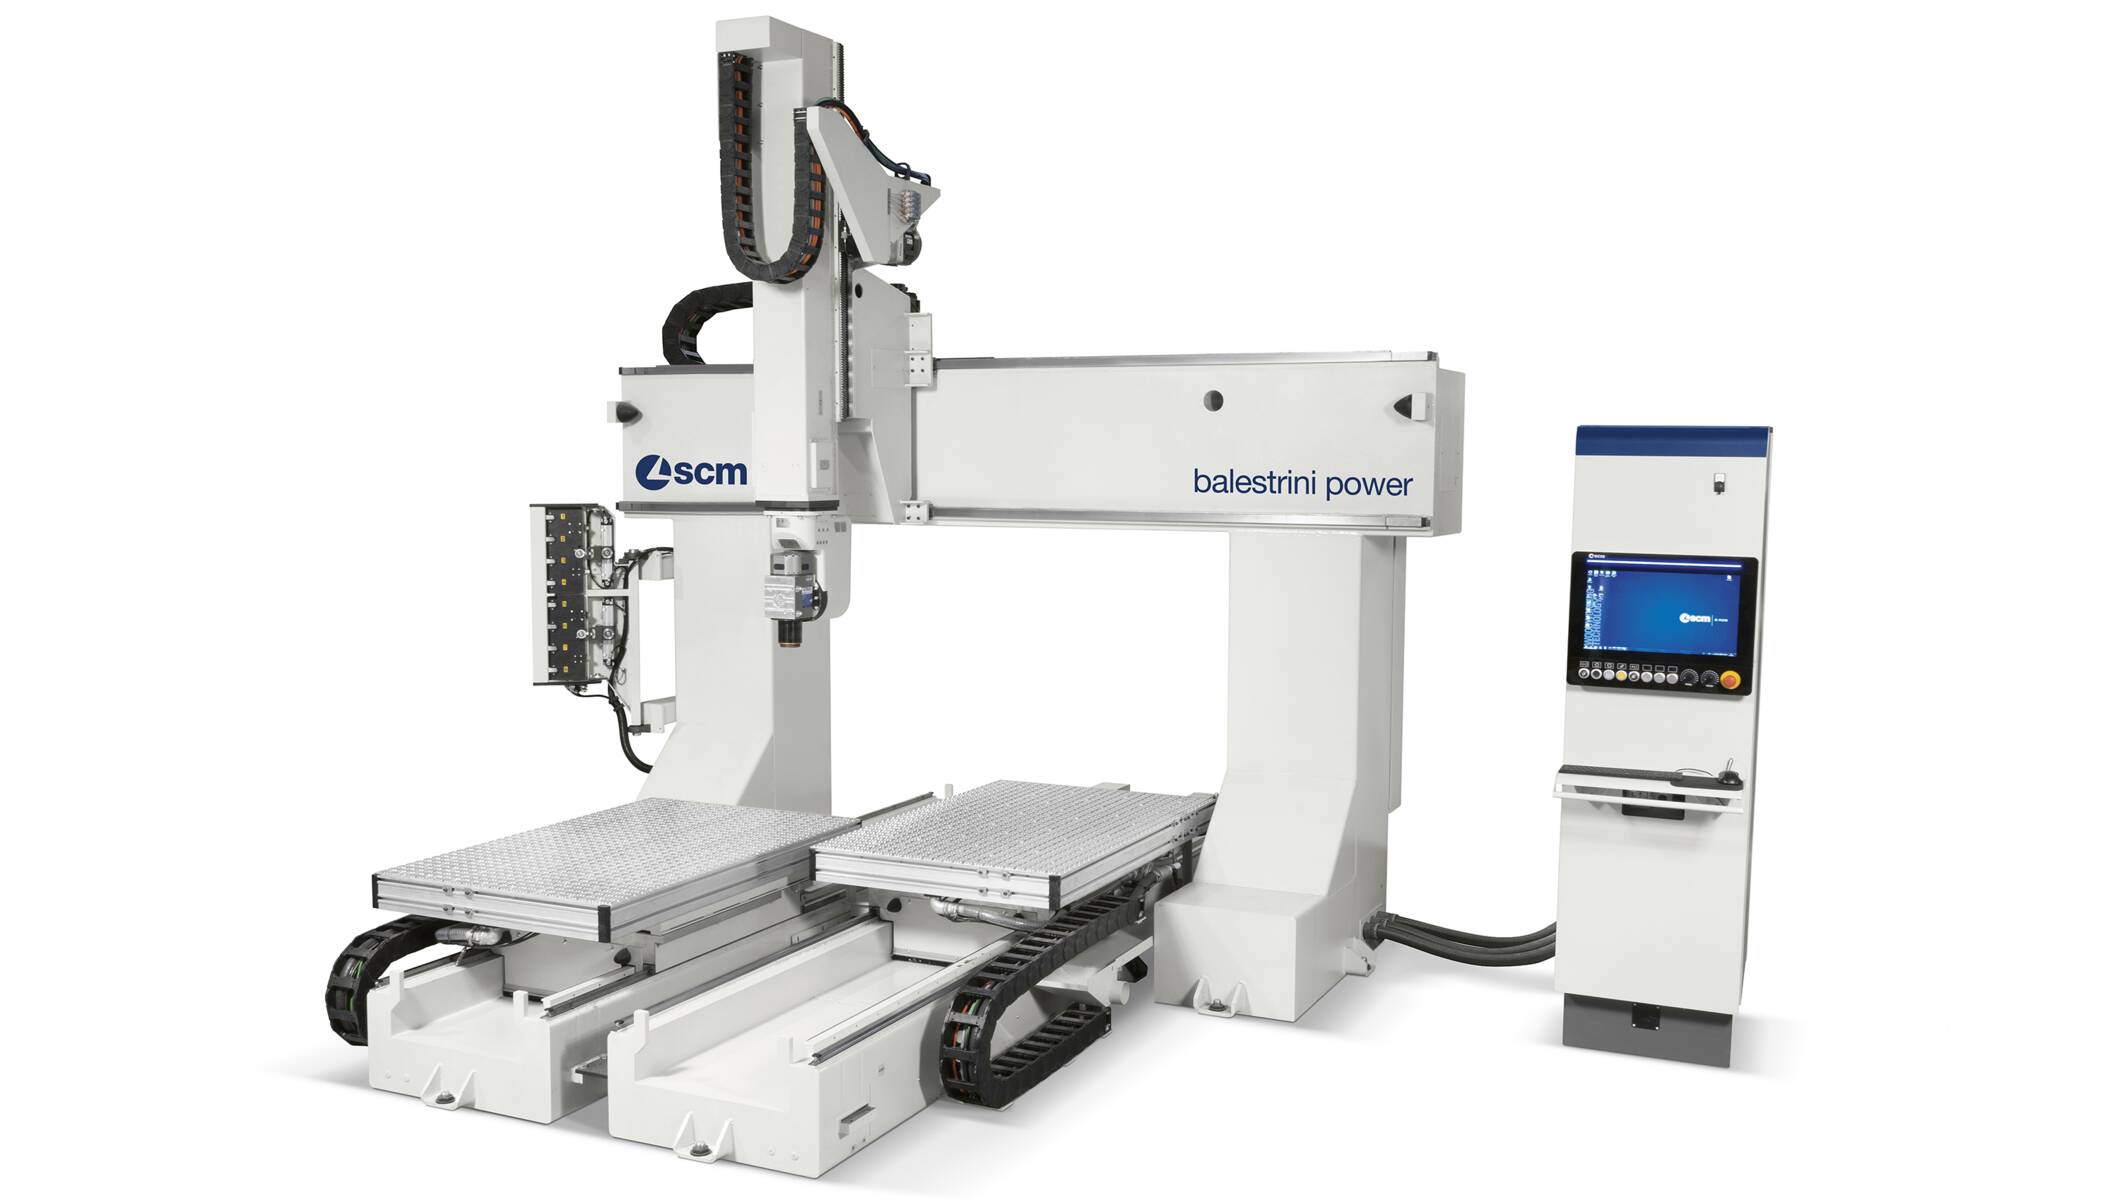 CNC Machining Centers - CNC Machining Centers for chair and desk components  - balestrini power